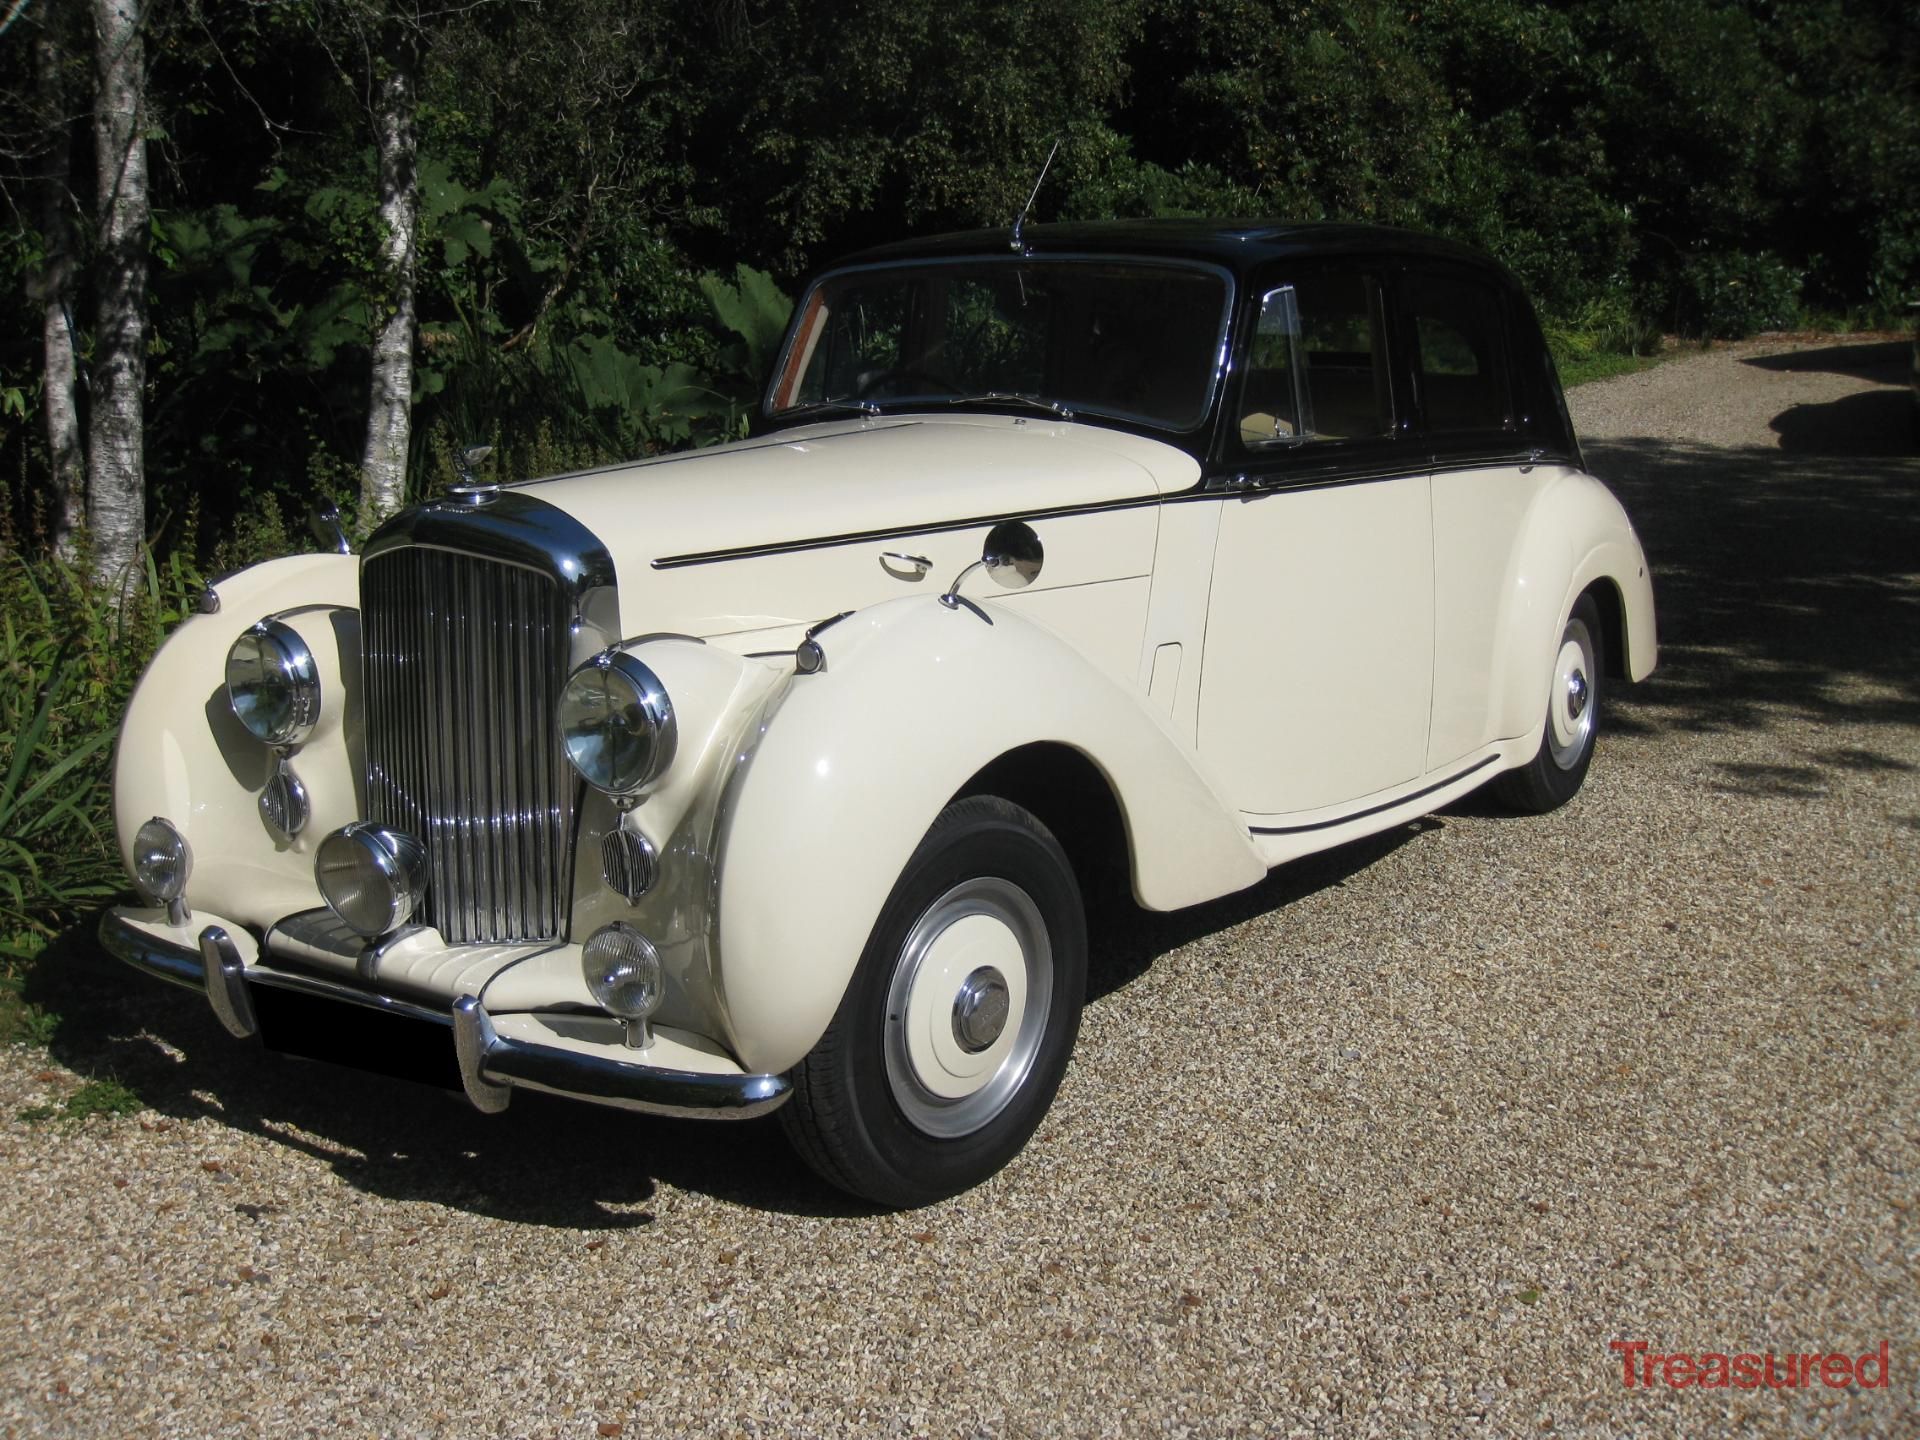 1952 Bentley R-Type Classic Cars for sale - Treasured Cars